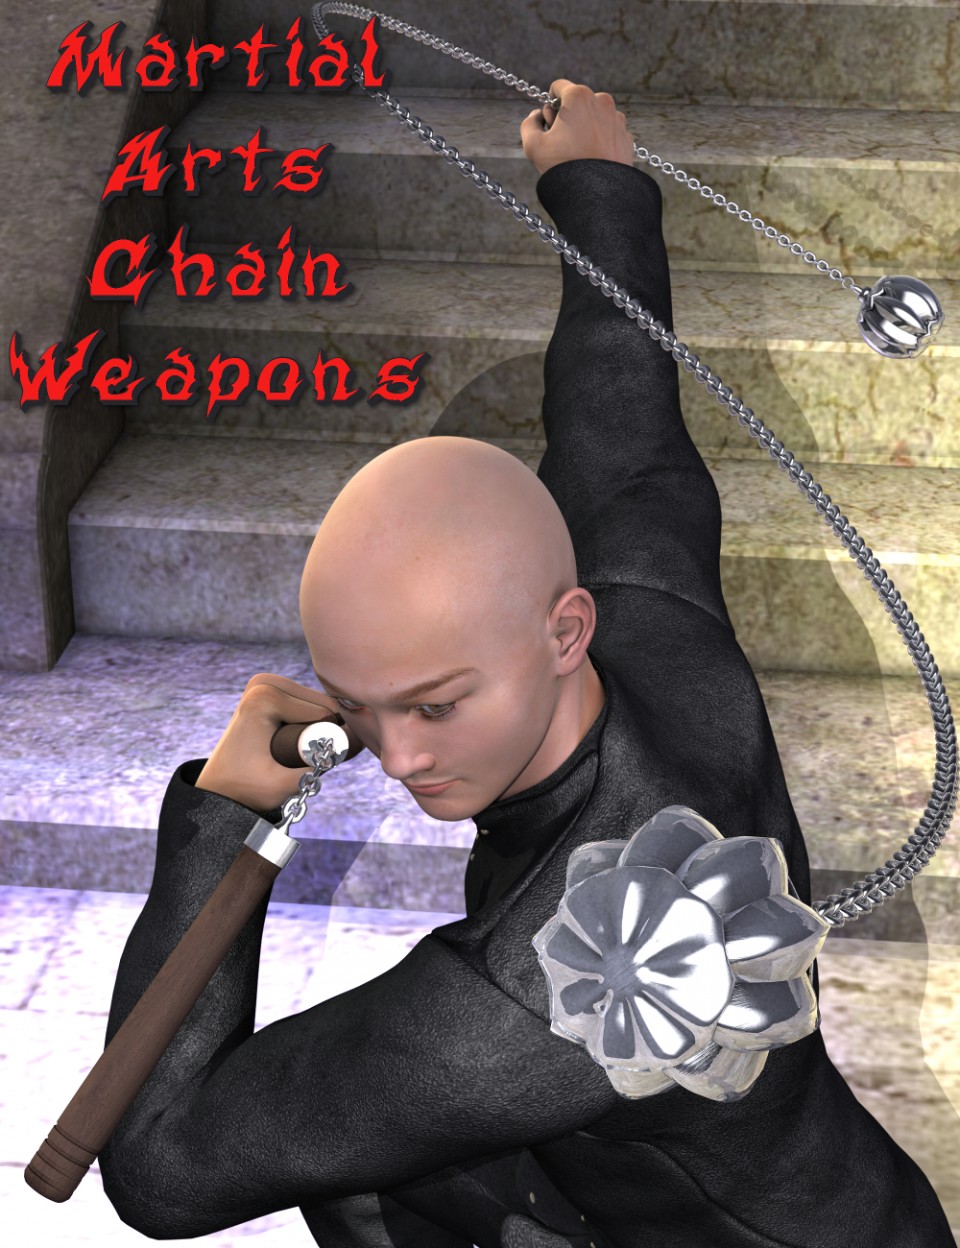 Martial Arts Chain Weapons